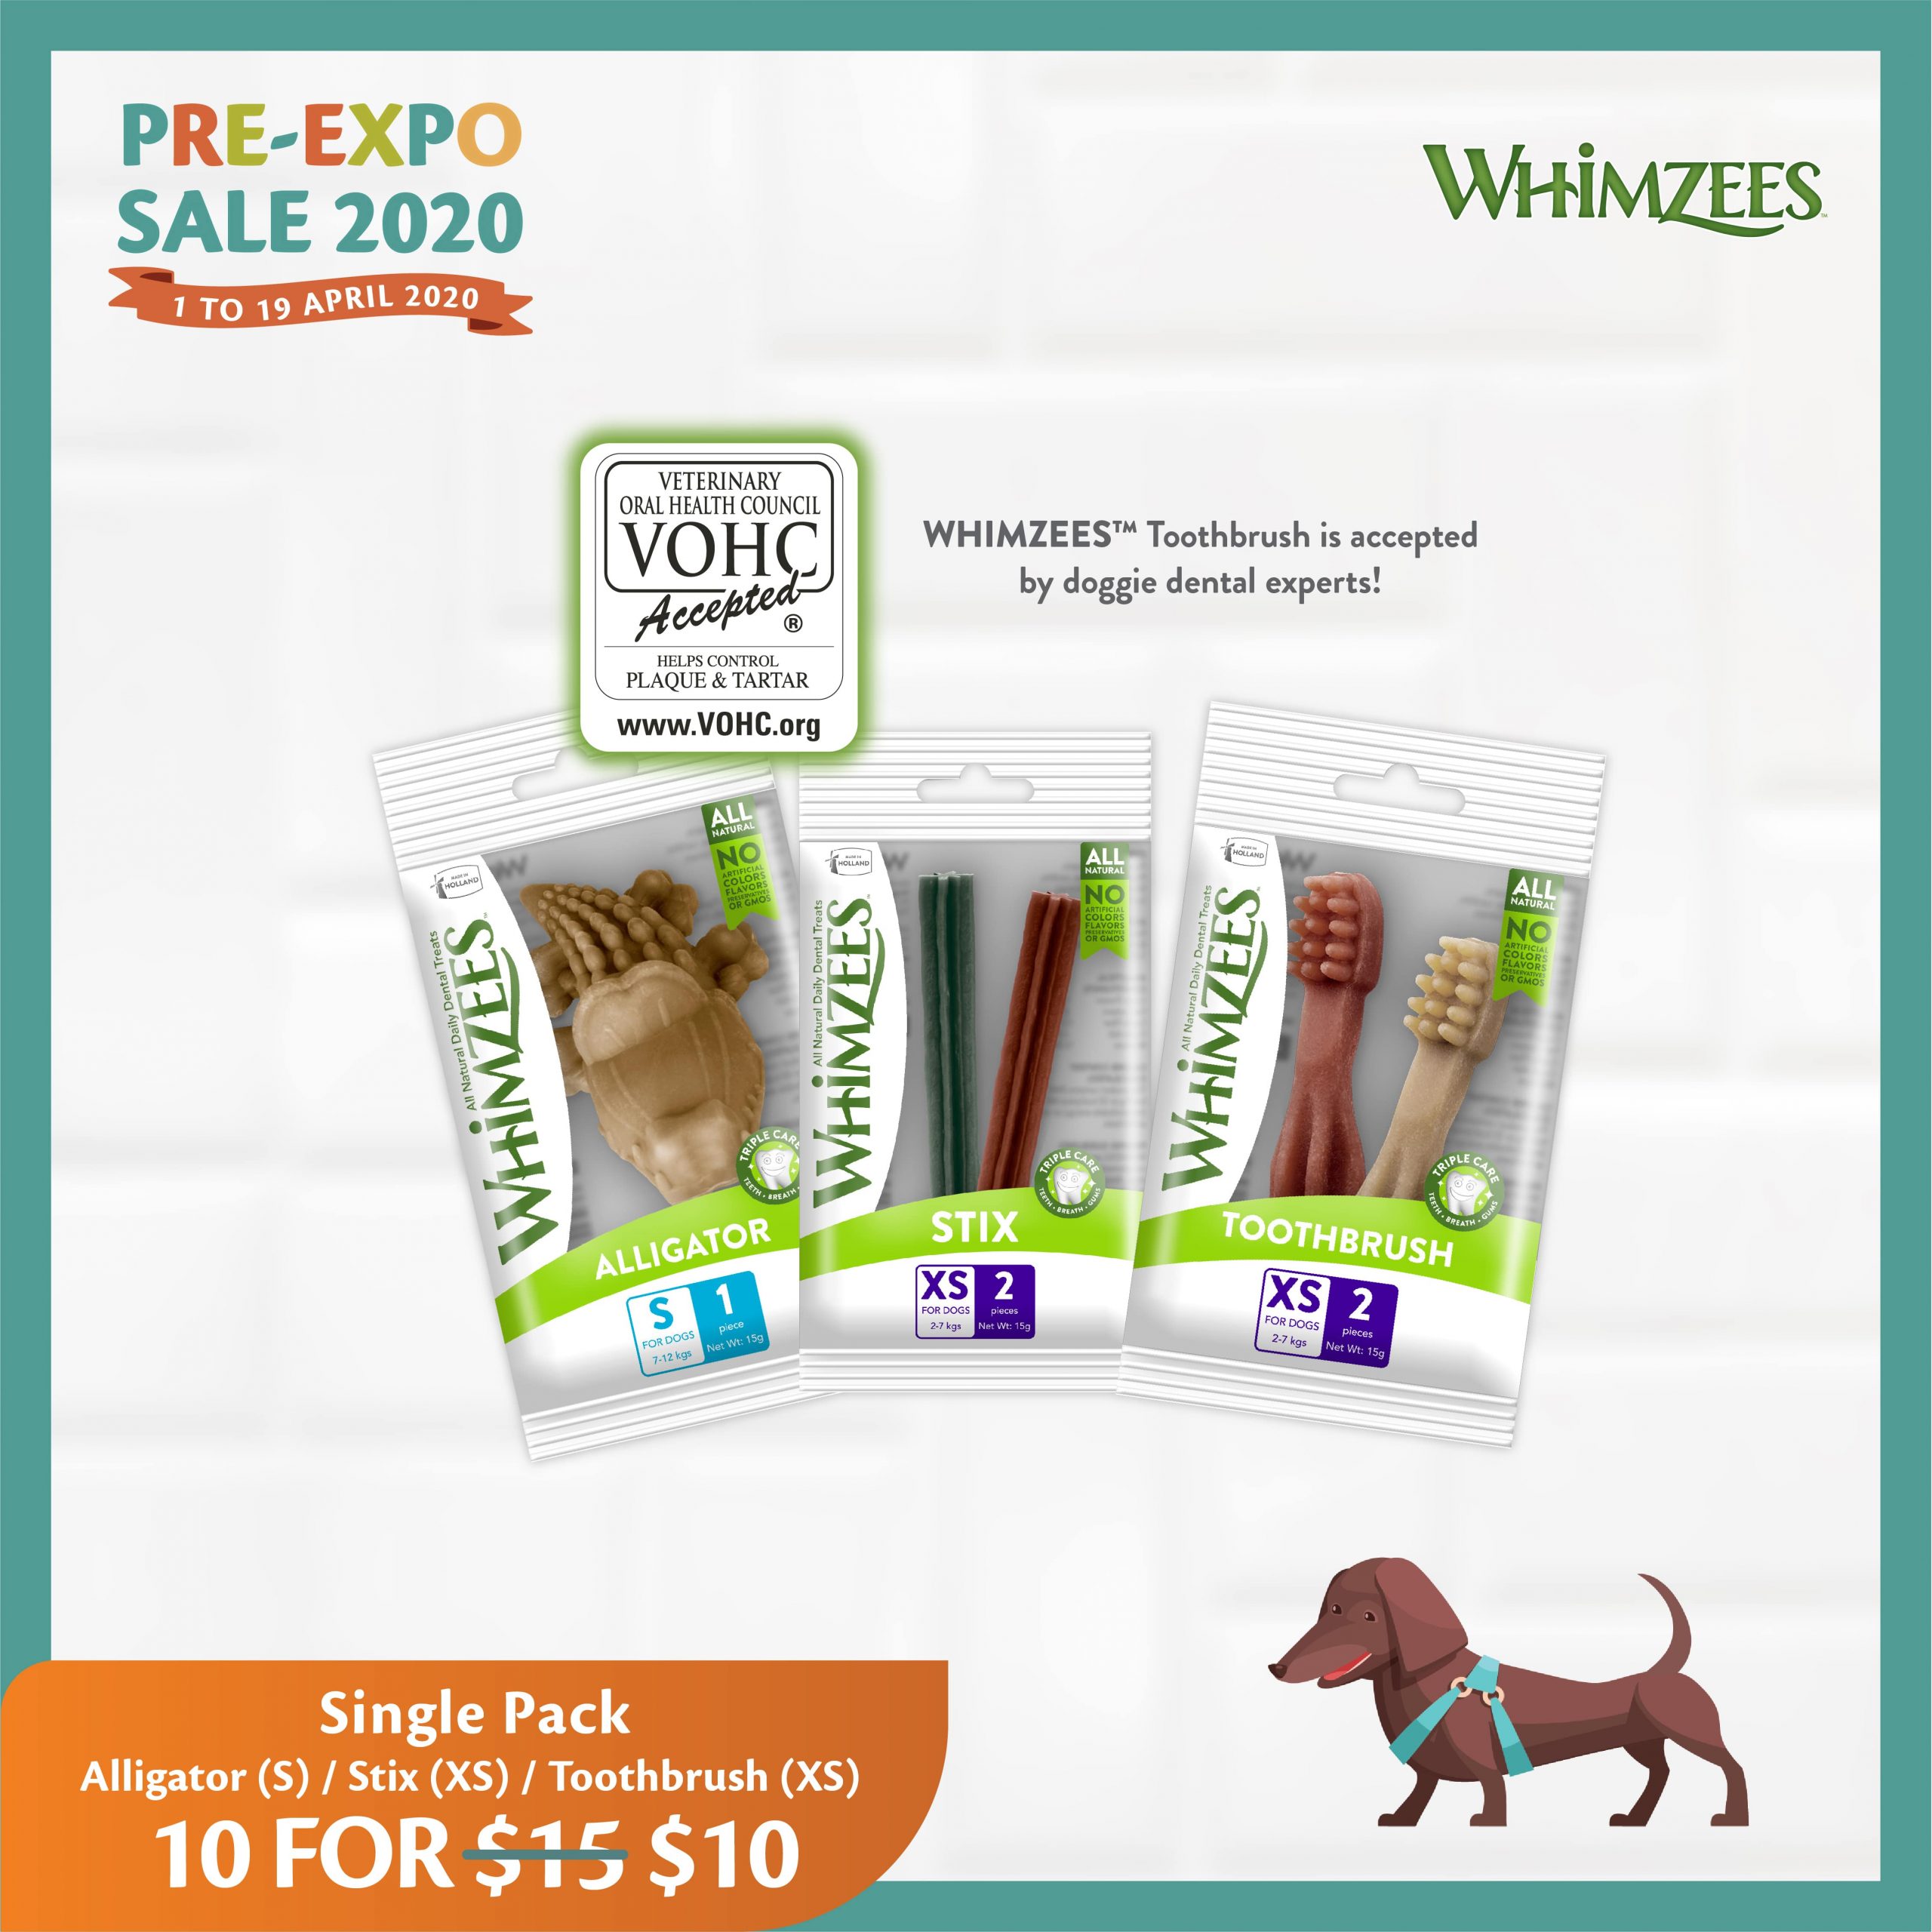 Pre-Expo Sale 2020 - Whimzees Single Pack 10 for $10 Deal